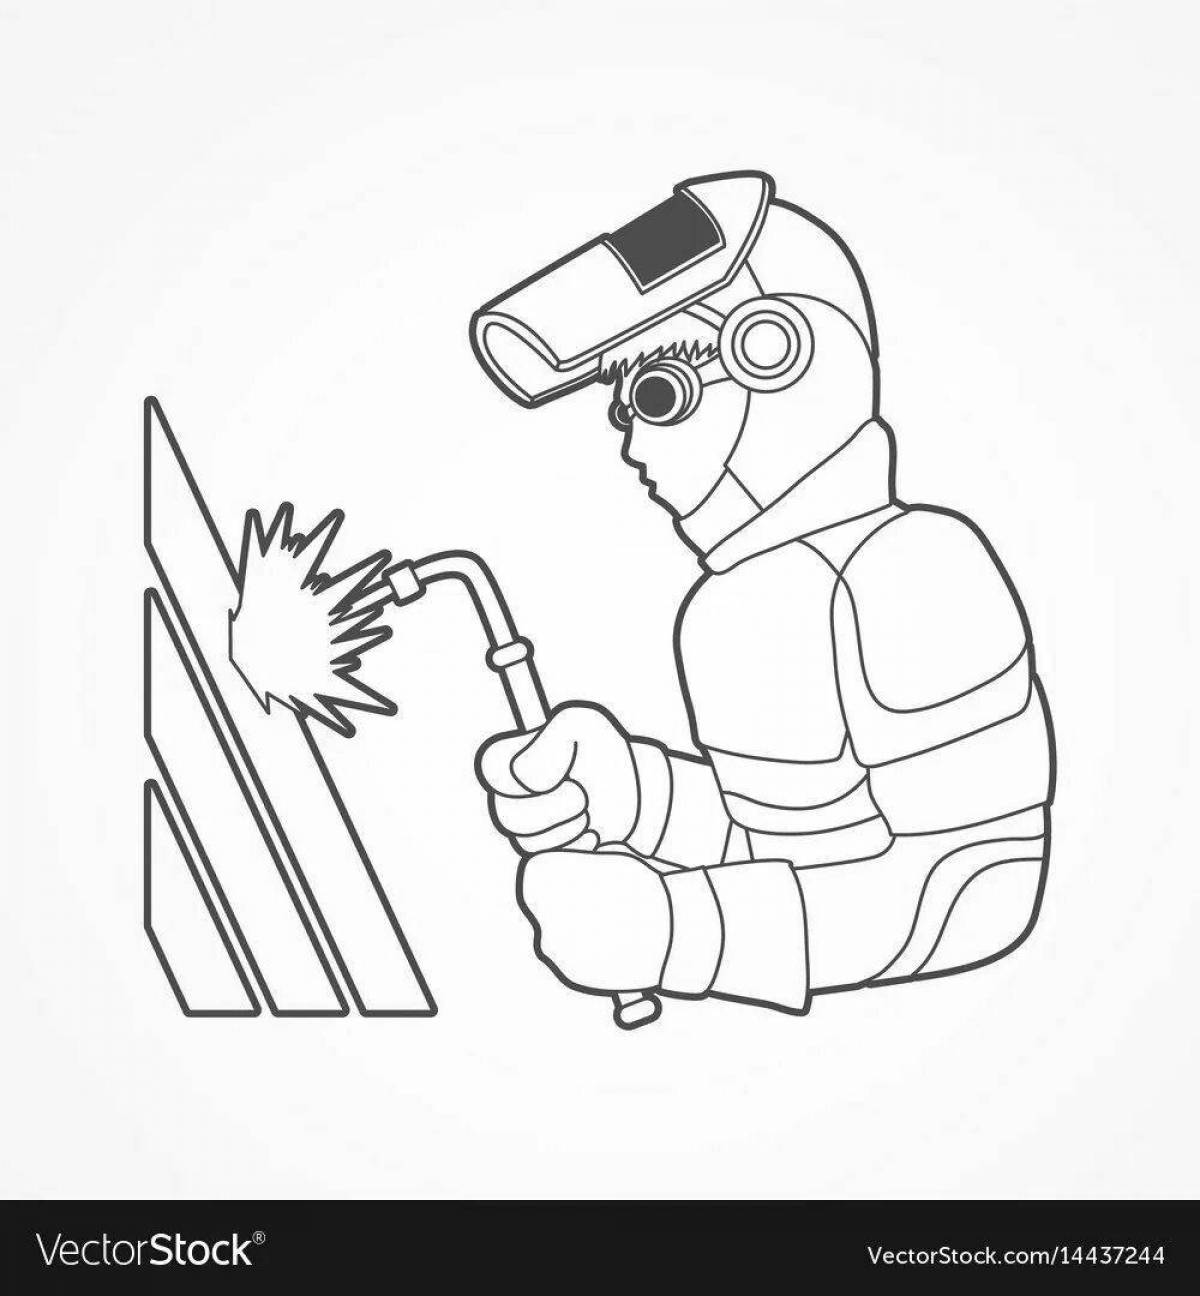 Exquisite welder coloring page